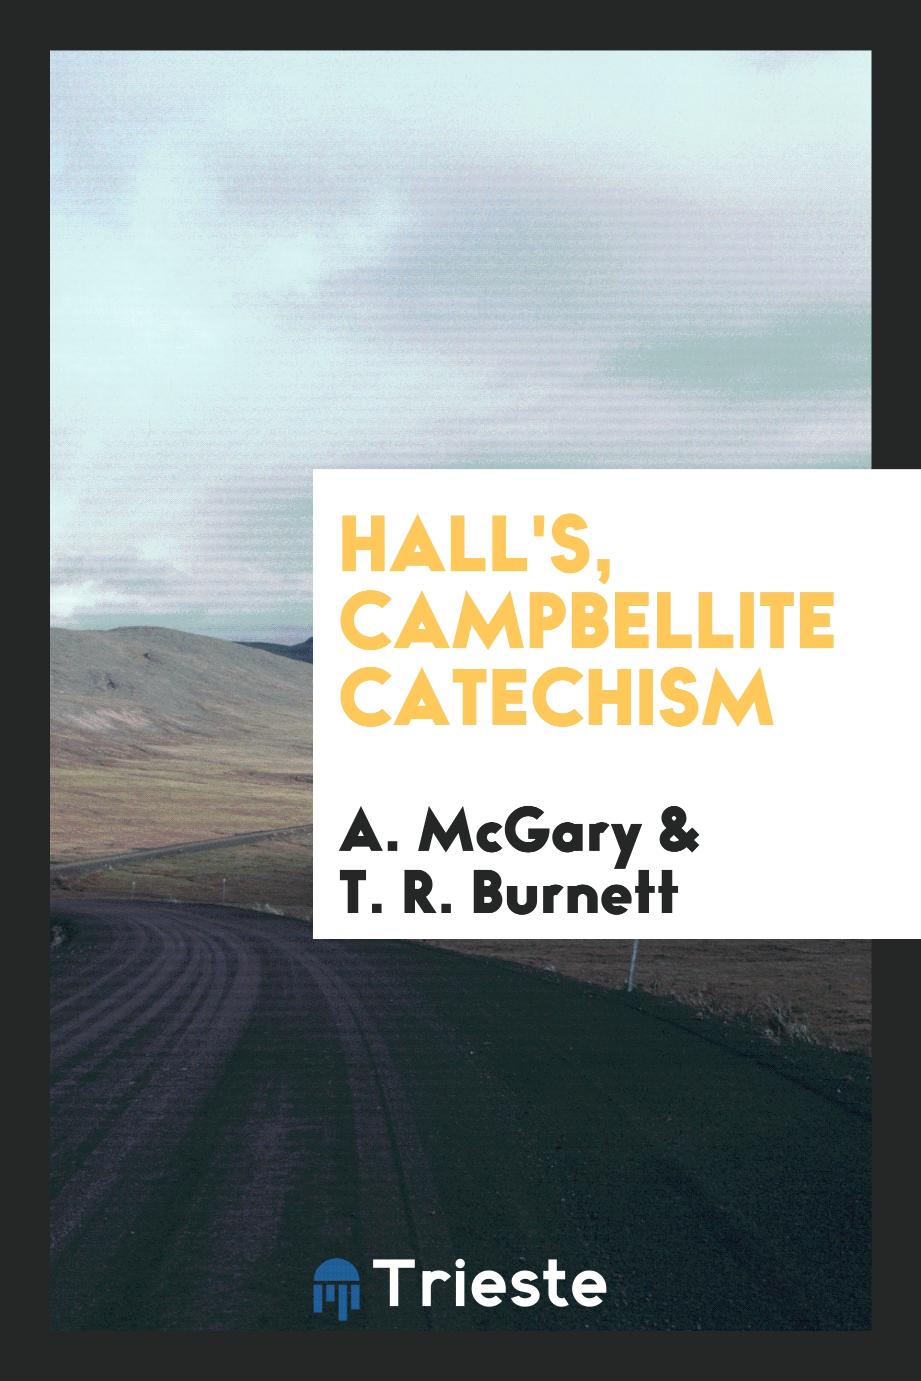 Hall's, Campbellite Catechism